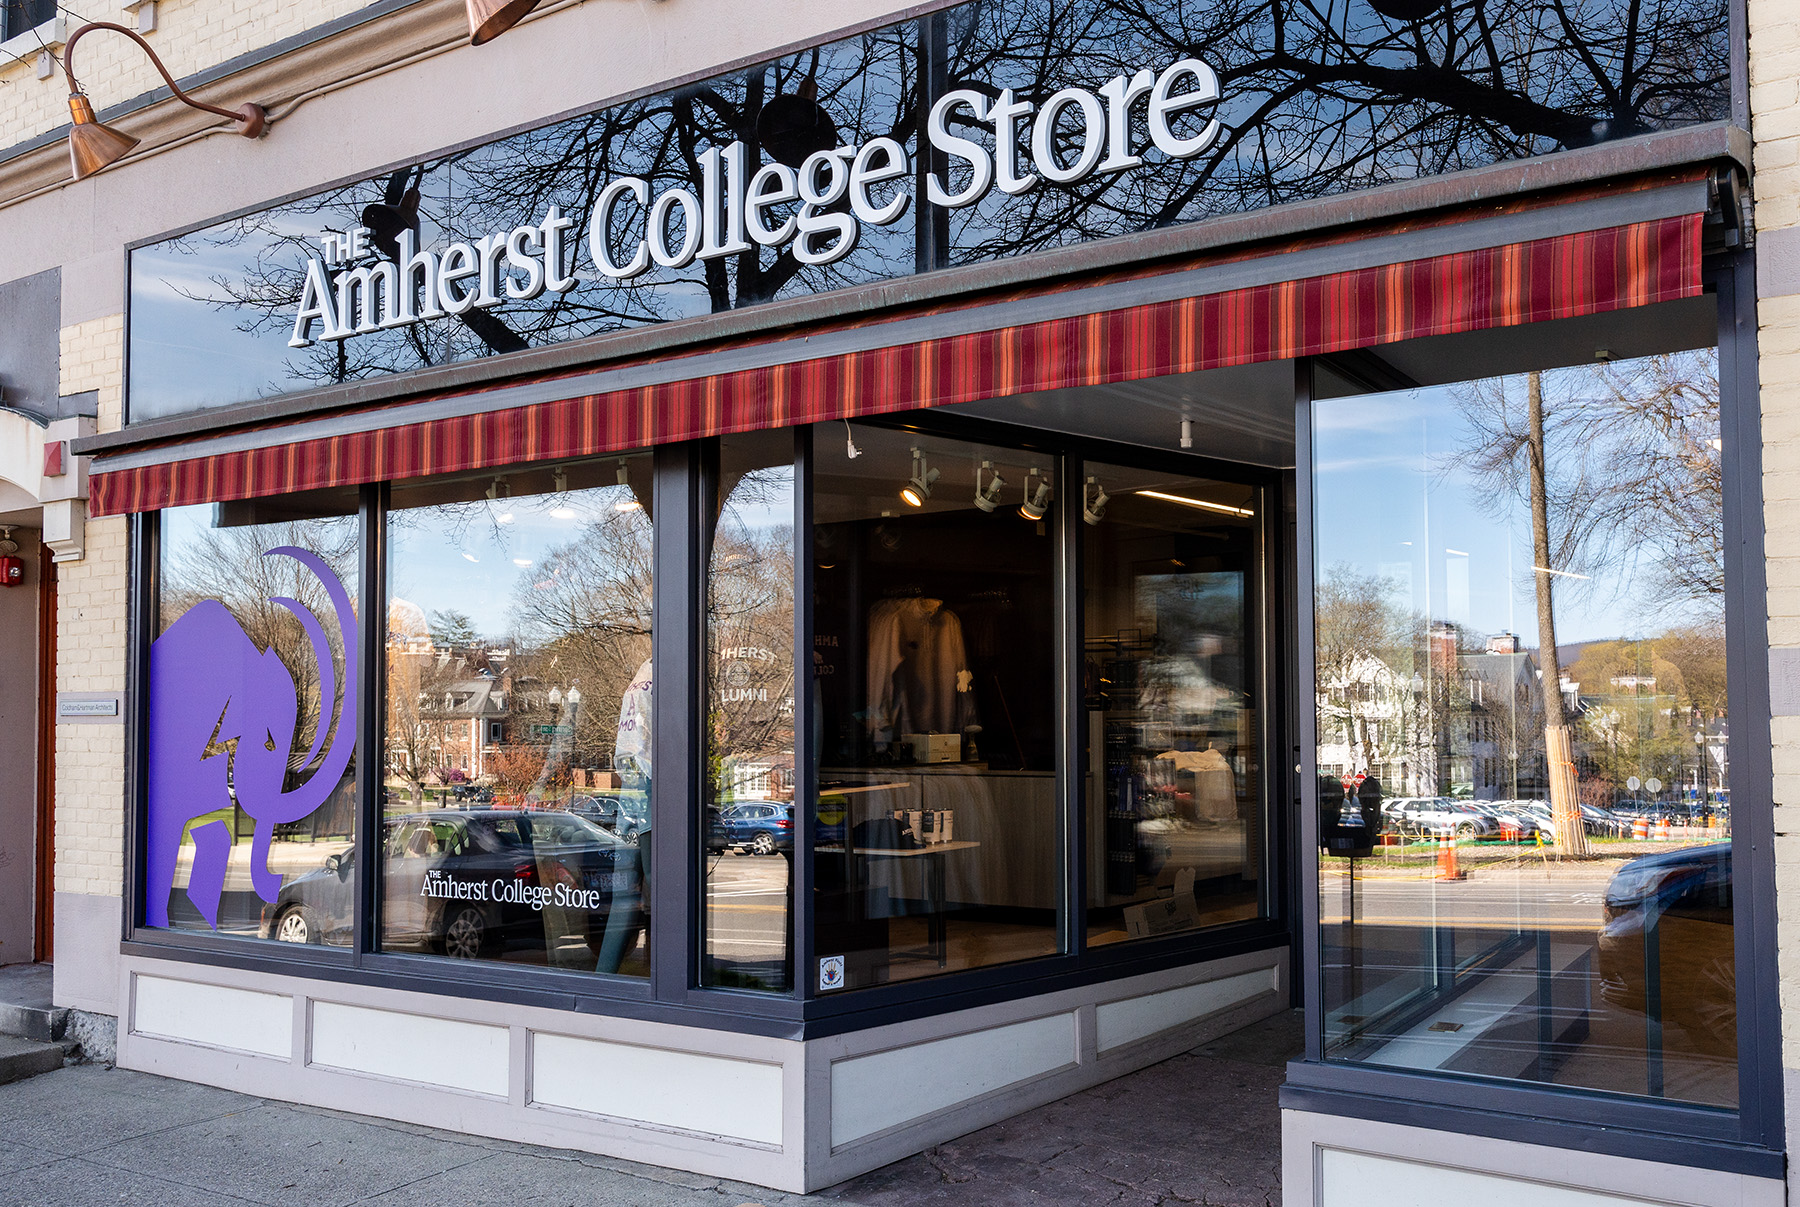 A storefront with a sign that says Amherst College Store.